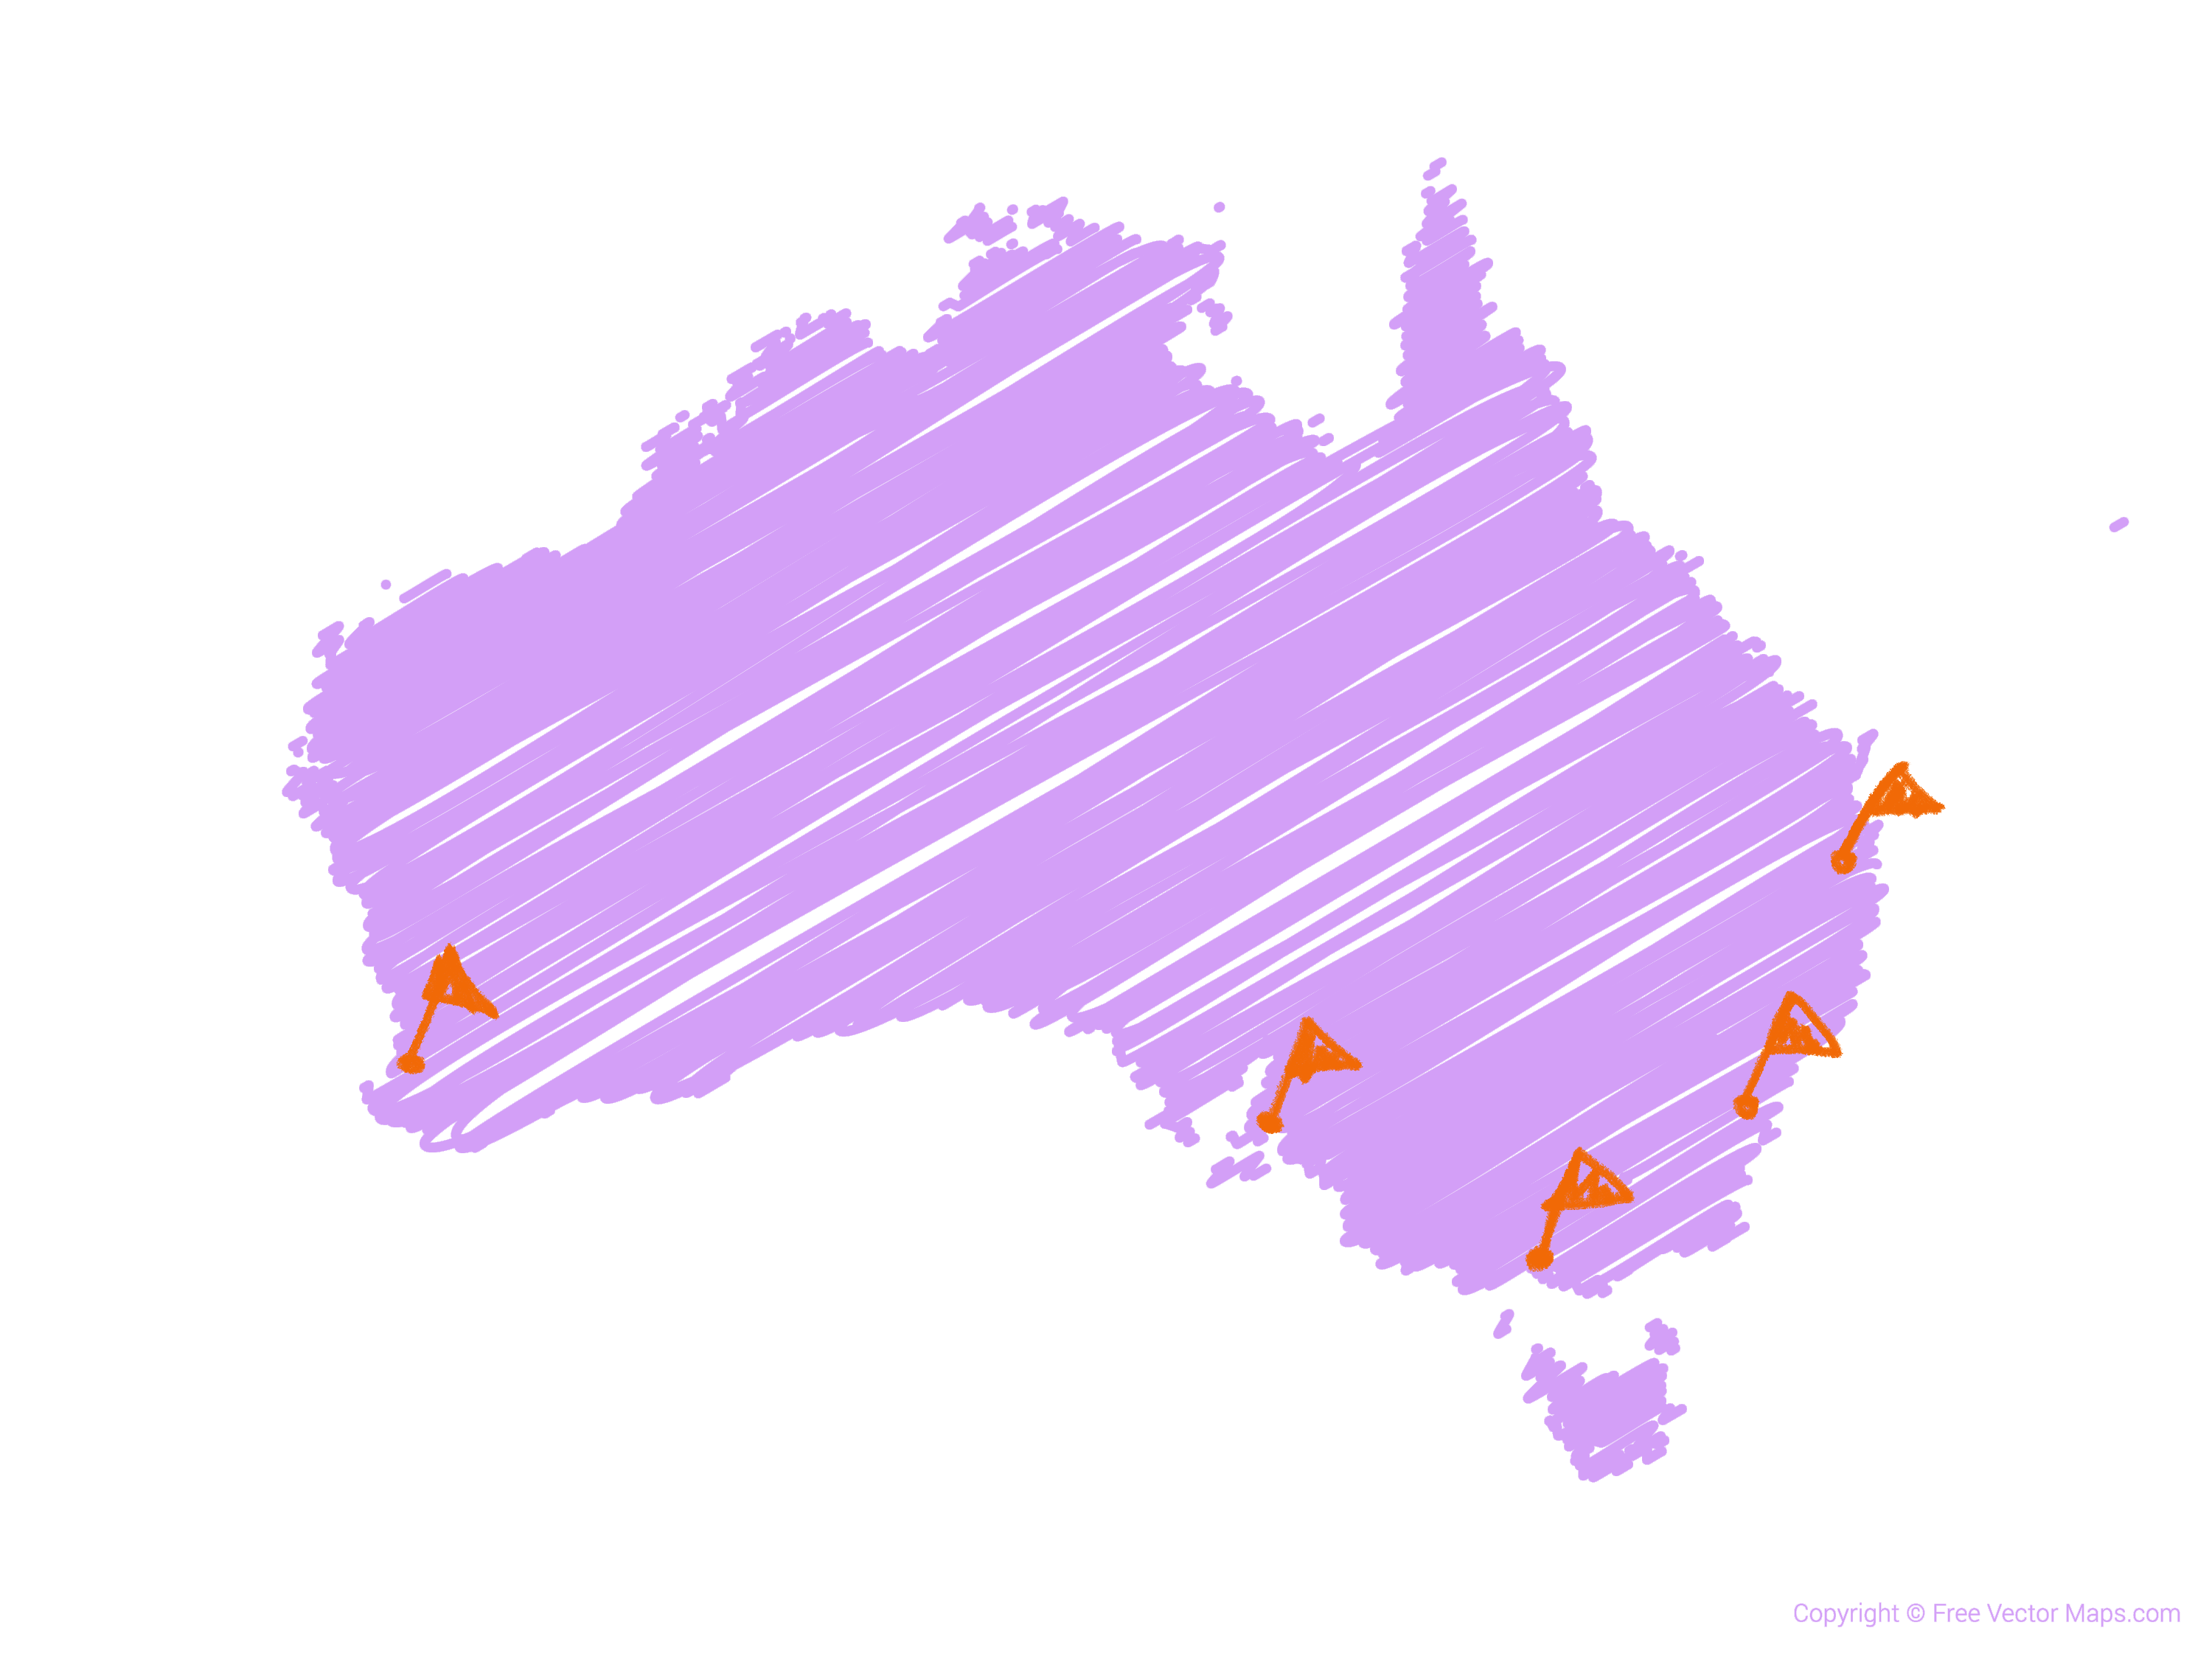 an image of a handrawn map of australia